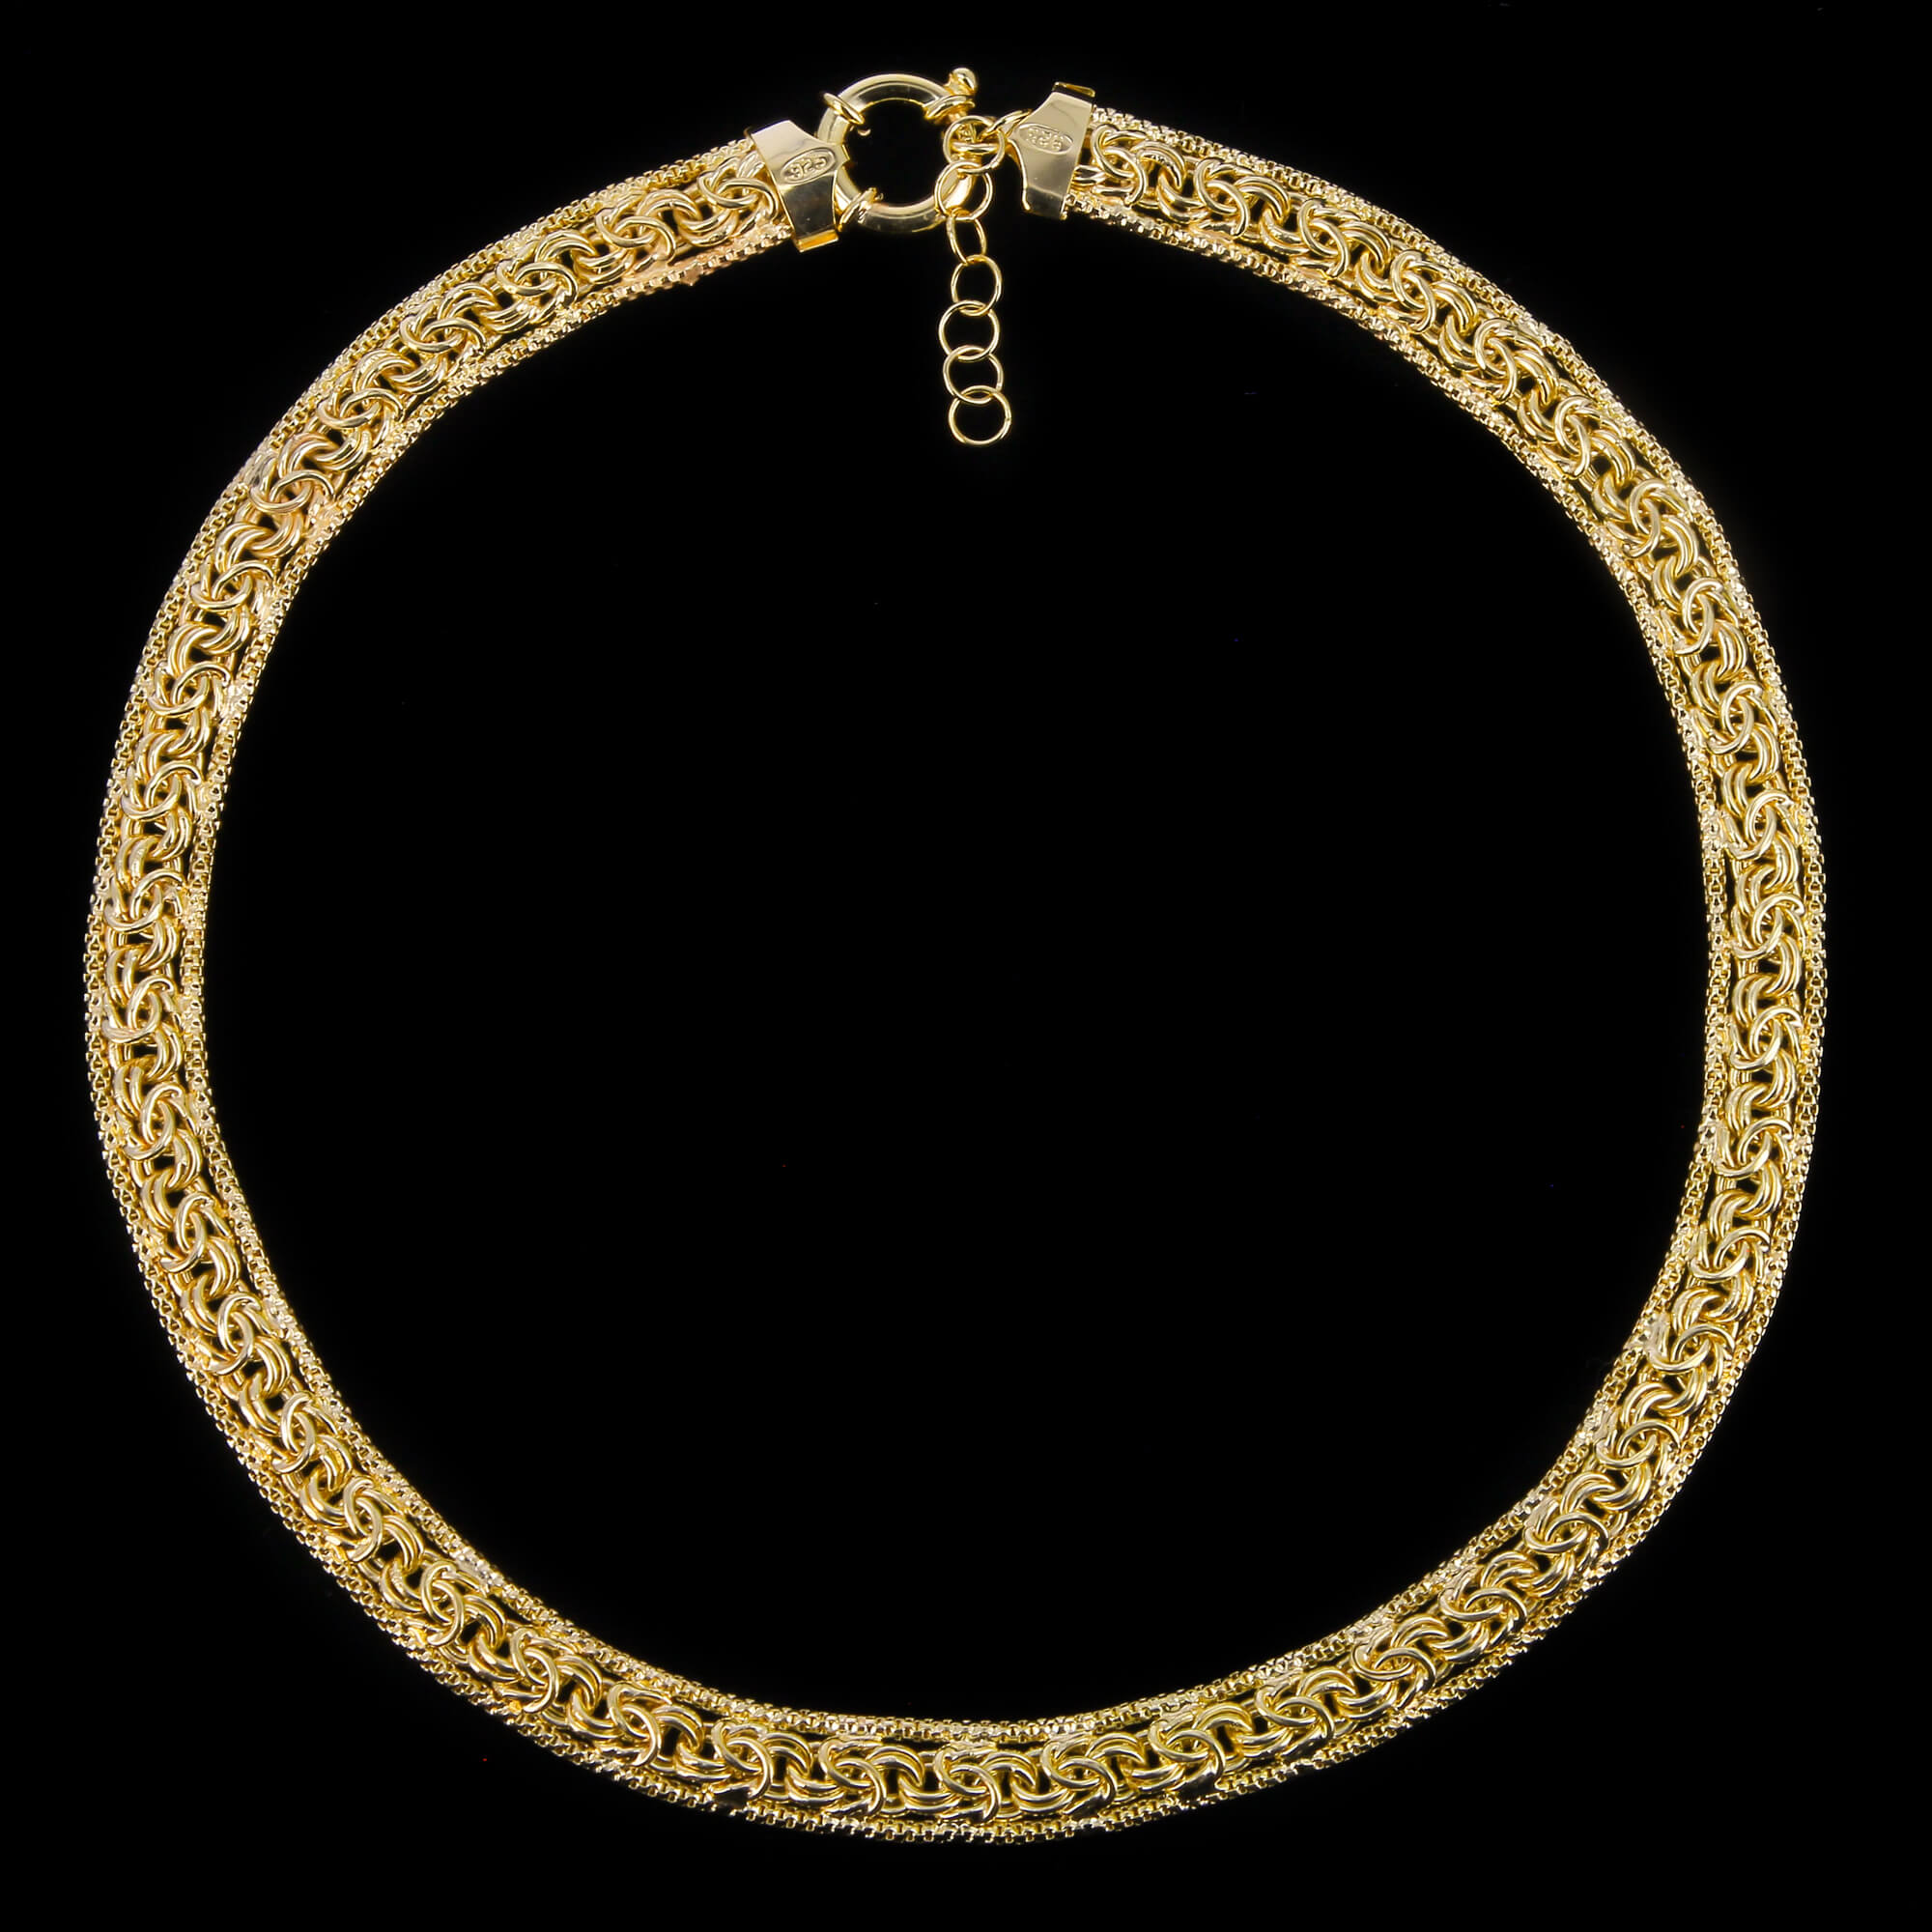 Ornate gold plated royal chain